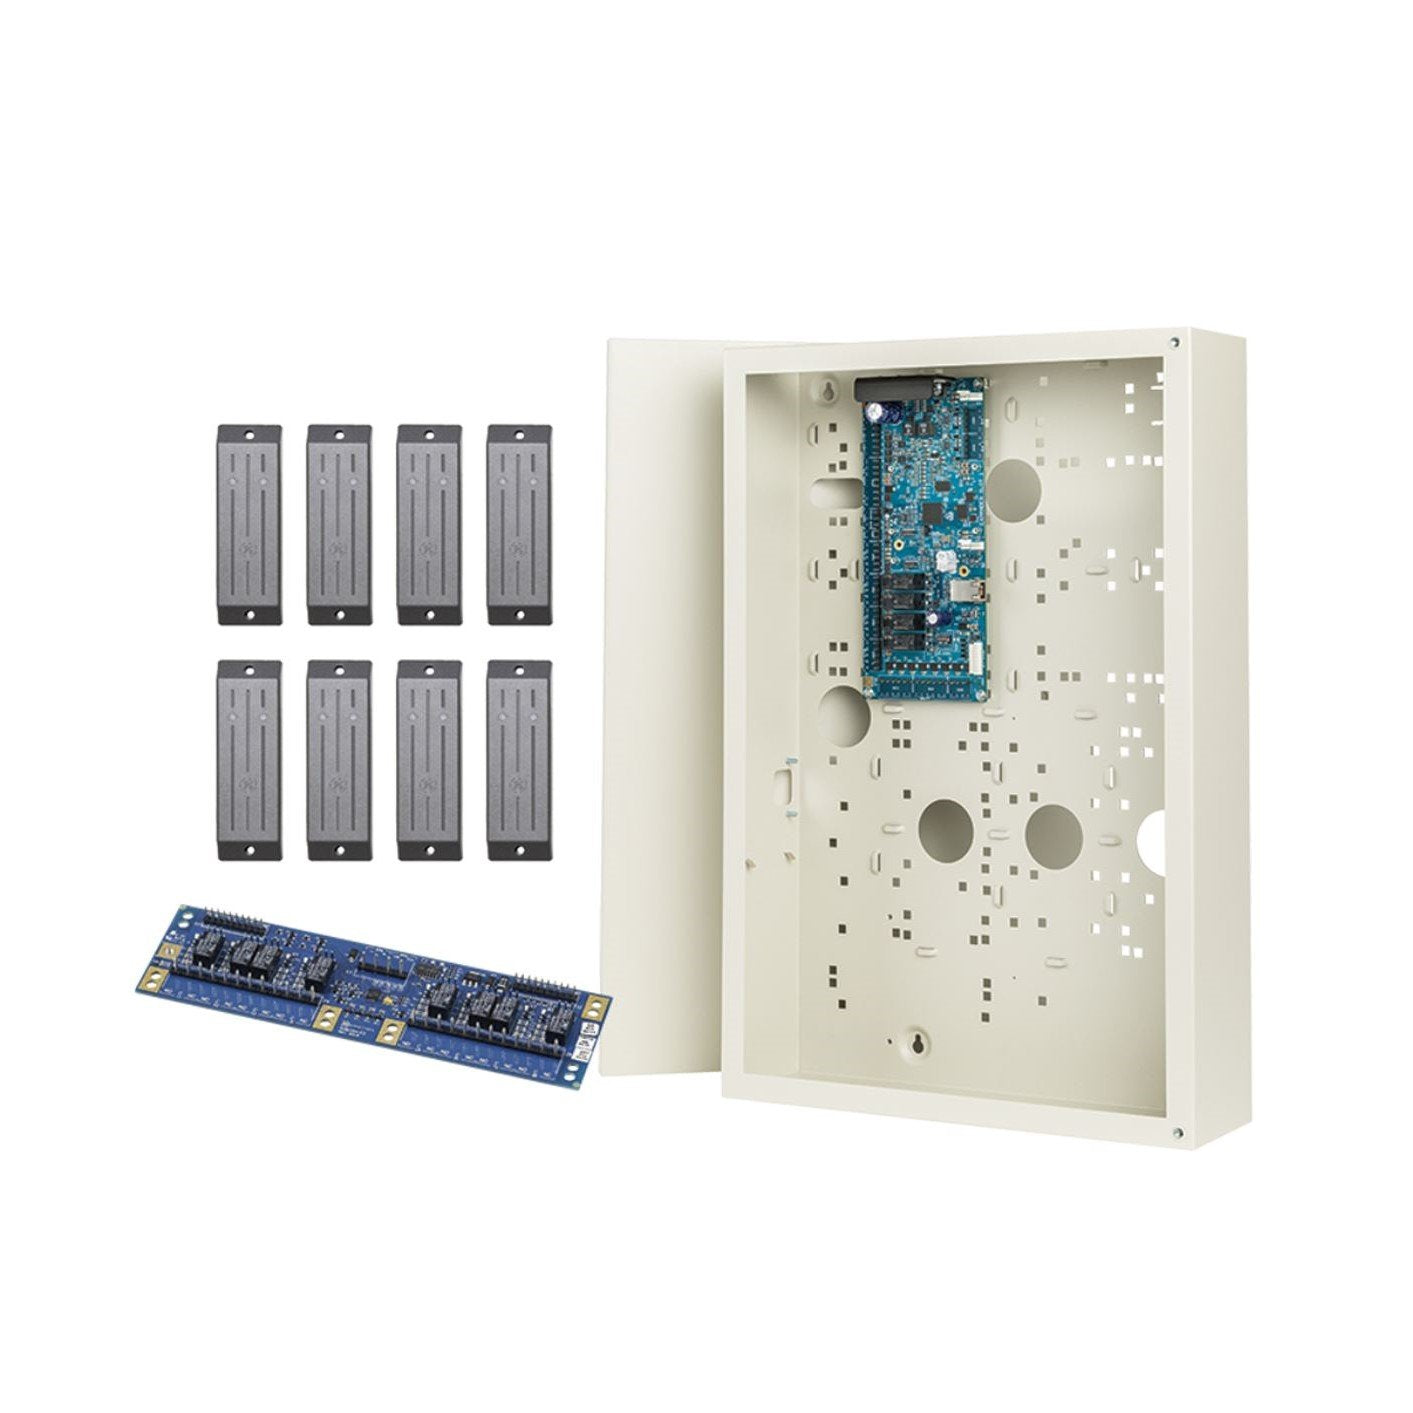 Tecom Challenger Network Access Controller NAC With Enclosure And 8 x TS0870H, 1 x TS0841 (S7021A)